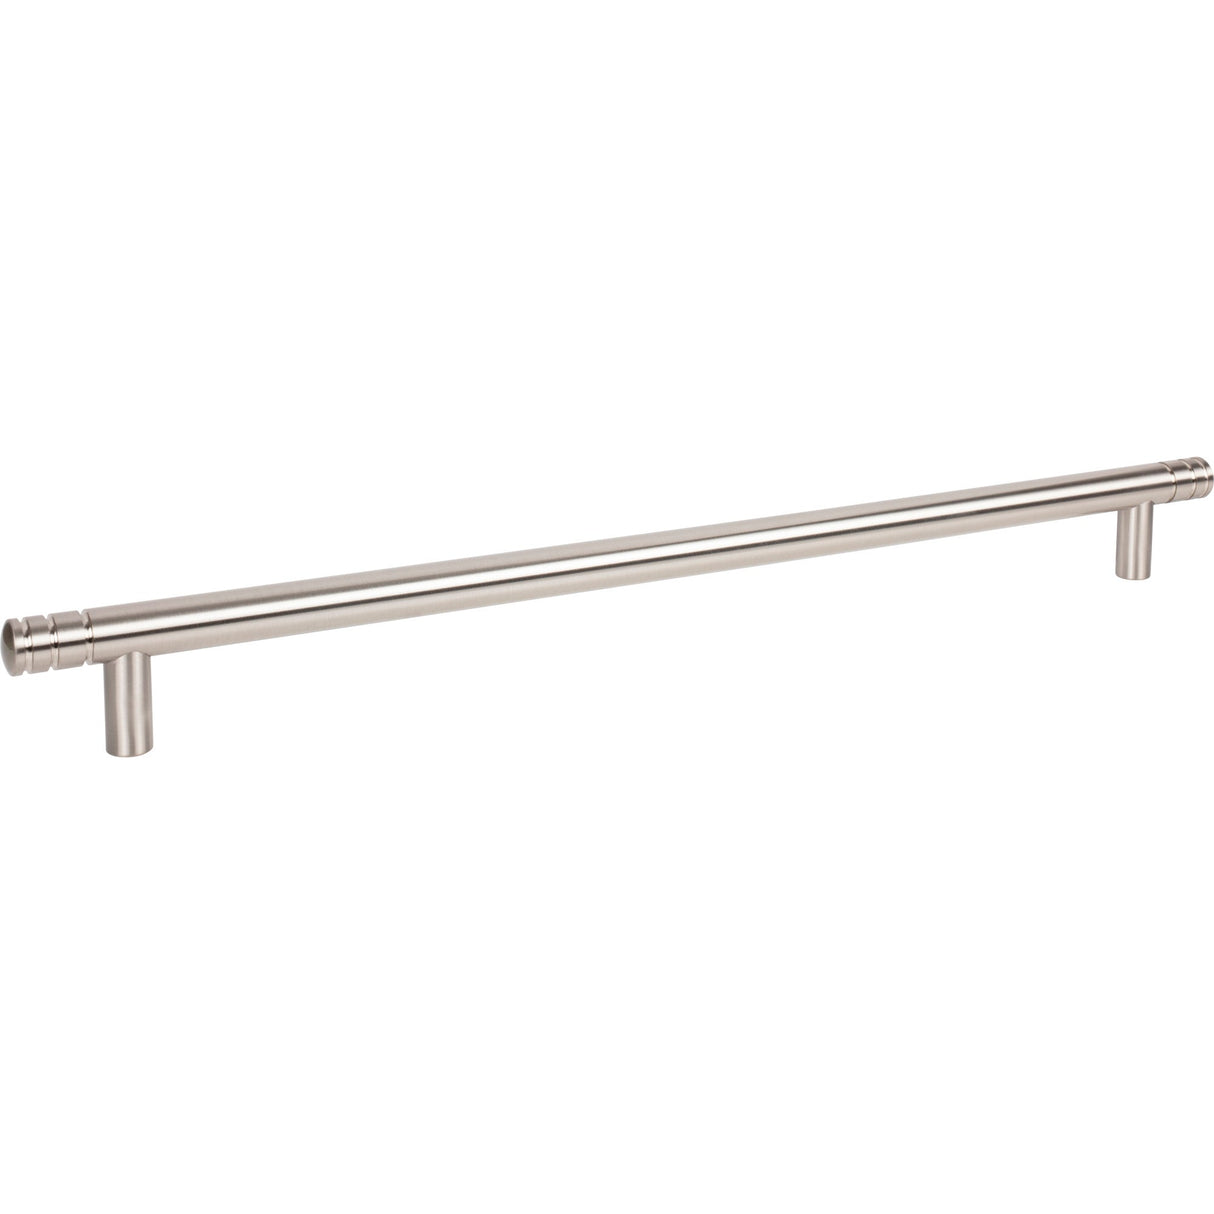 Atlas Homewares Griffith Appliance Pull 18 Inch (c-c) Brushed Nickel